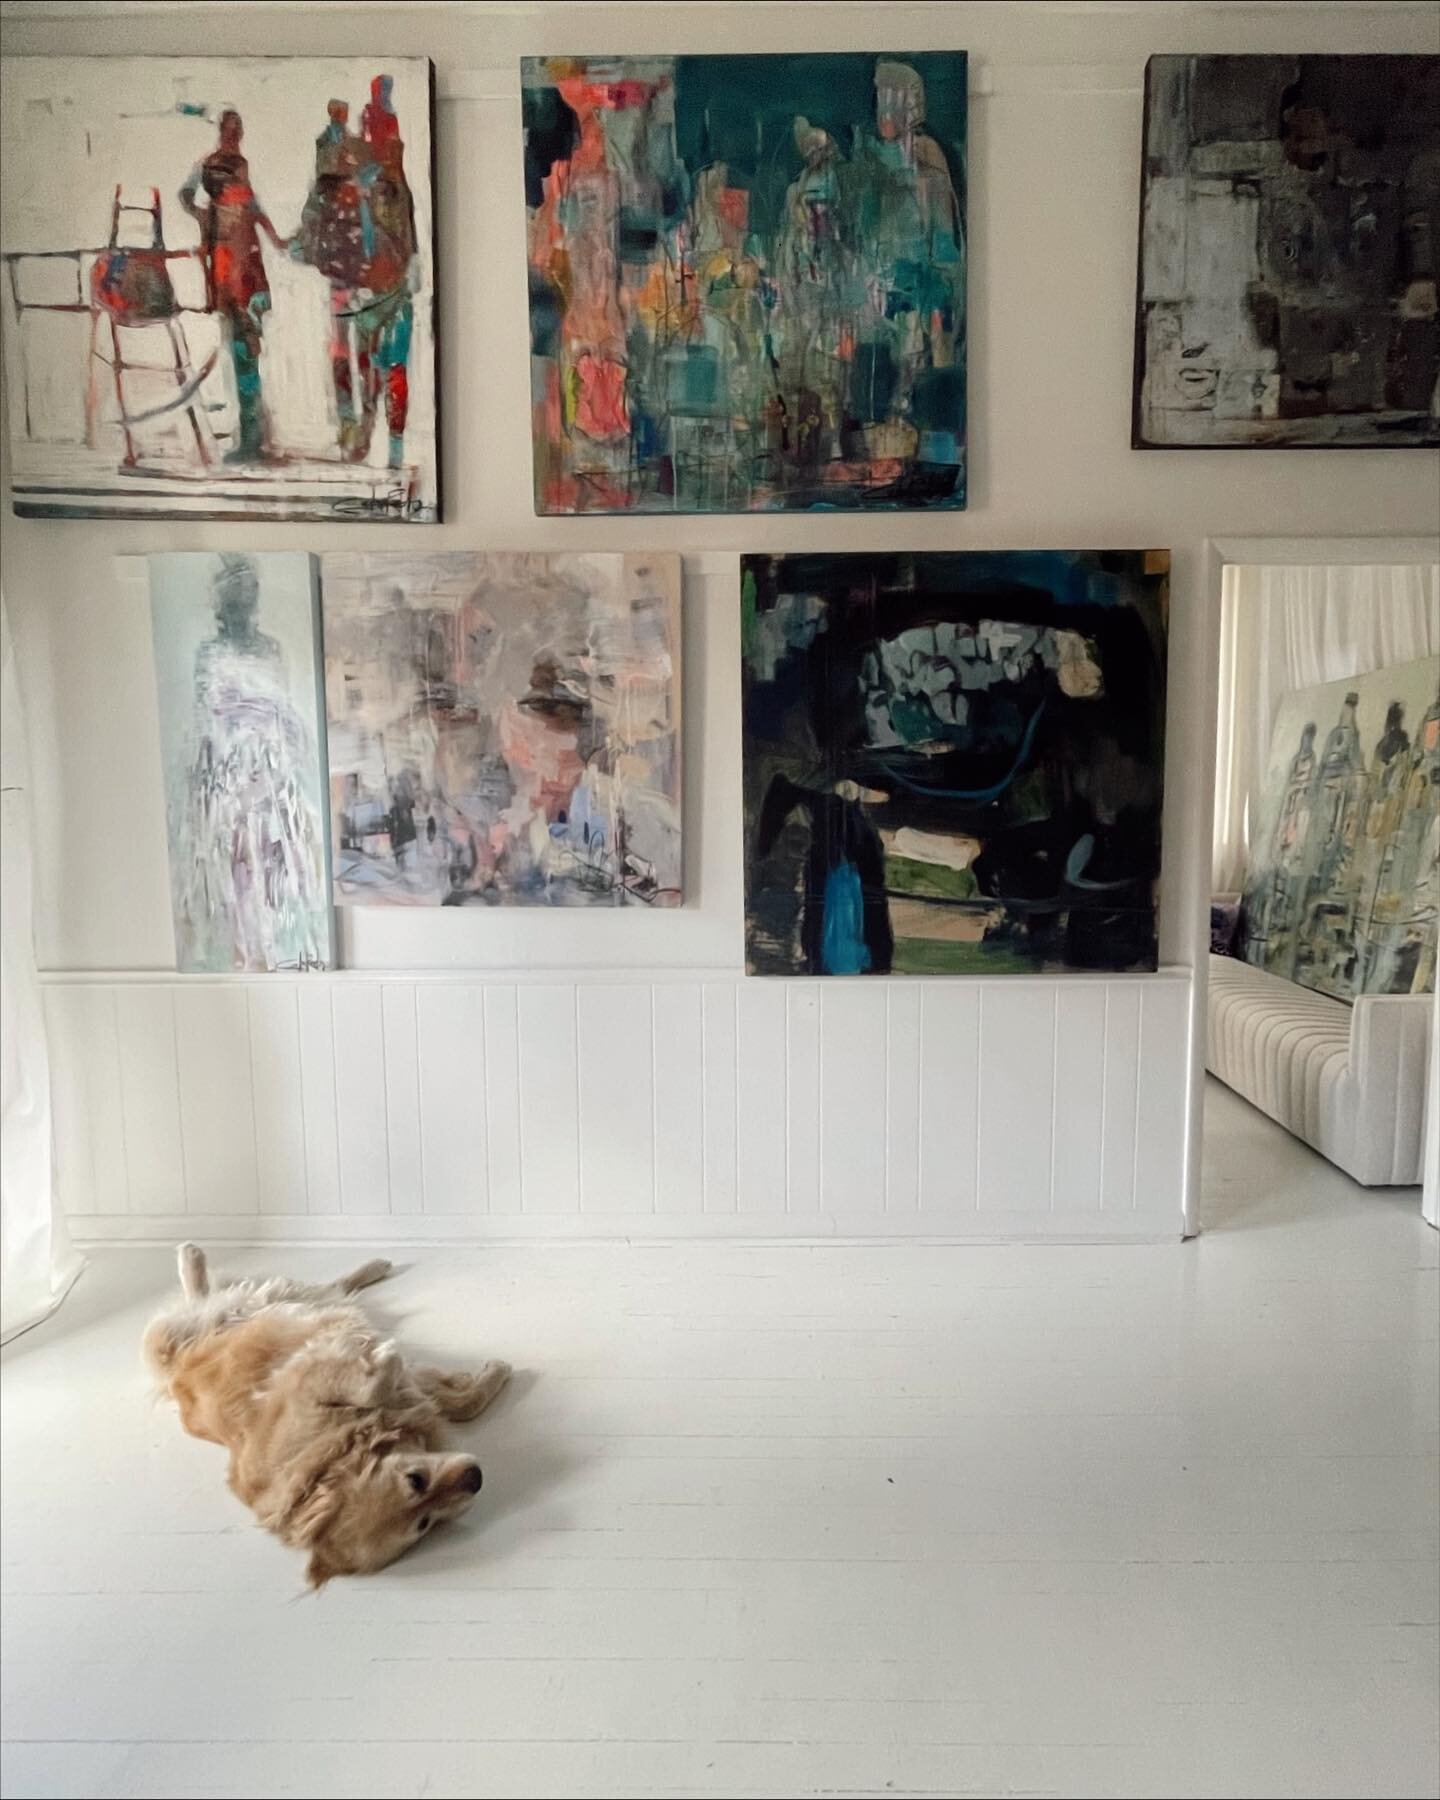 Happy Friday! We had a sweet studio visitor this week!✨🐶
.
.
.
#abstractartist #abstract_art #abstractexpressionism #abstractpainting #abstractart #contemporaryart #contemporarypainting #contemporaryartist #contemporary #abstract #art #artist #paint